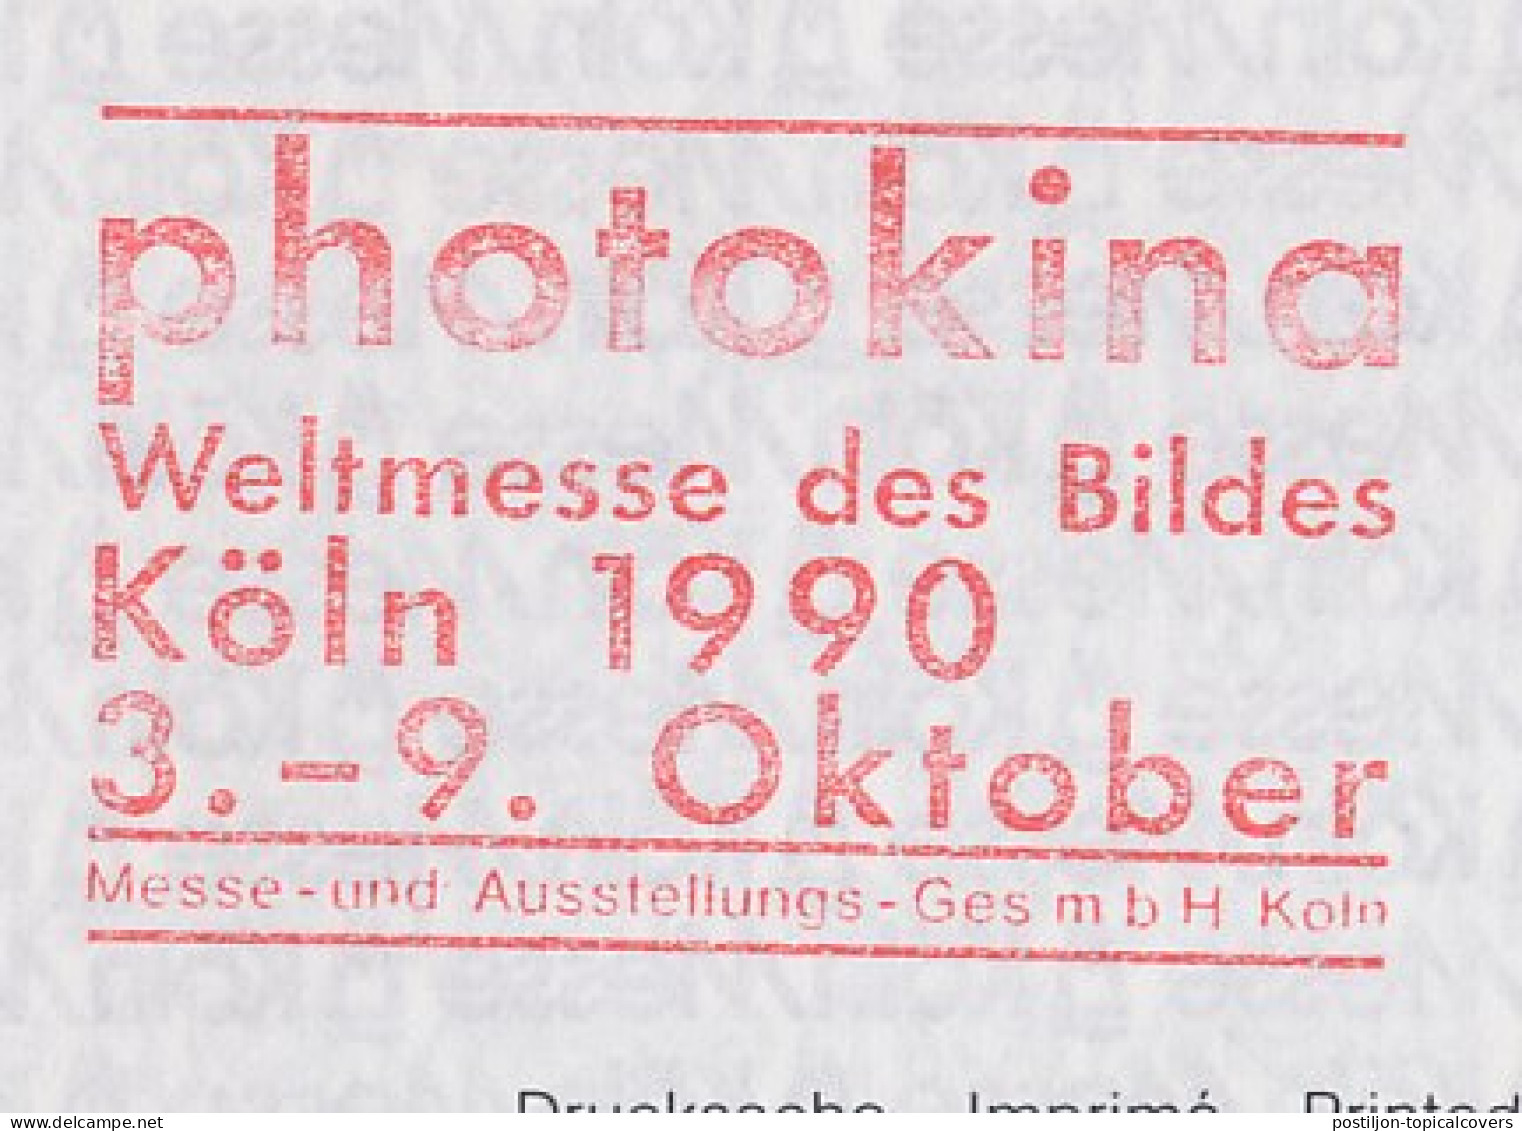 Meter Cover Germany 1990 Photokina - Worlds Fair Of Image - Photographie